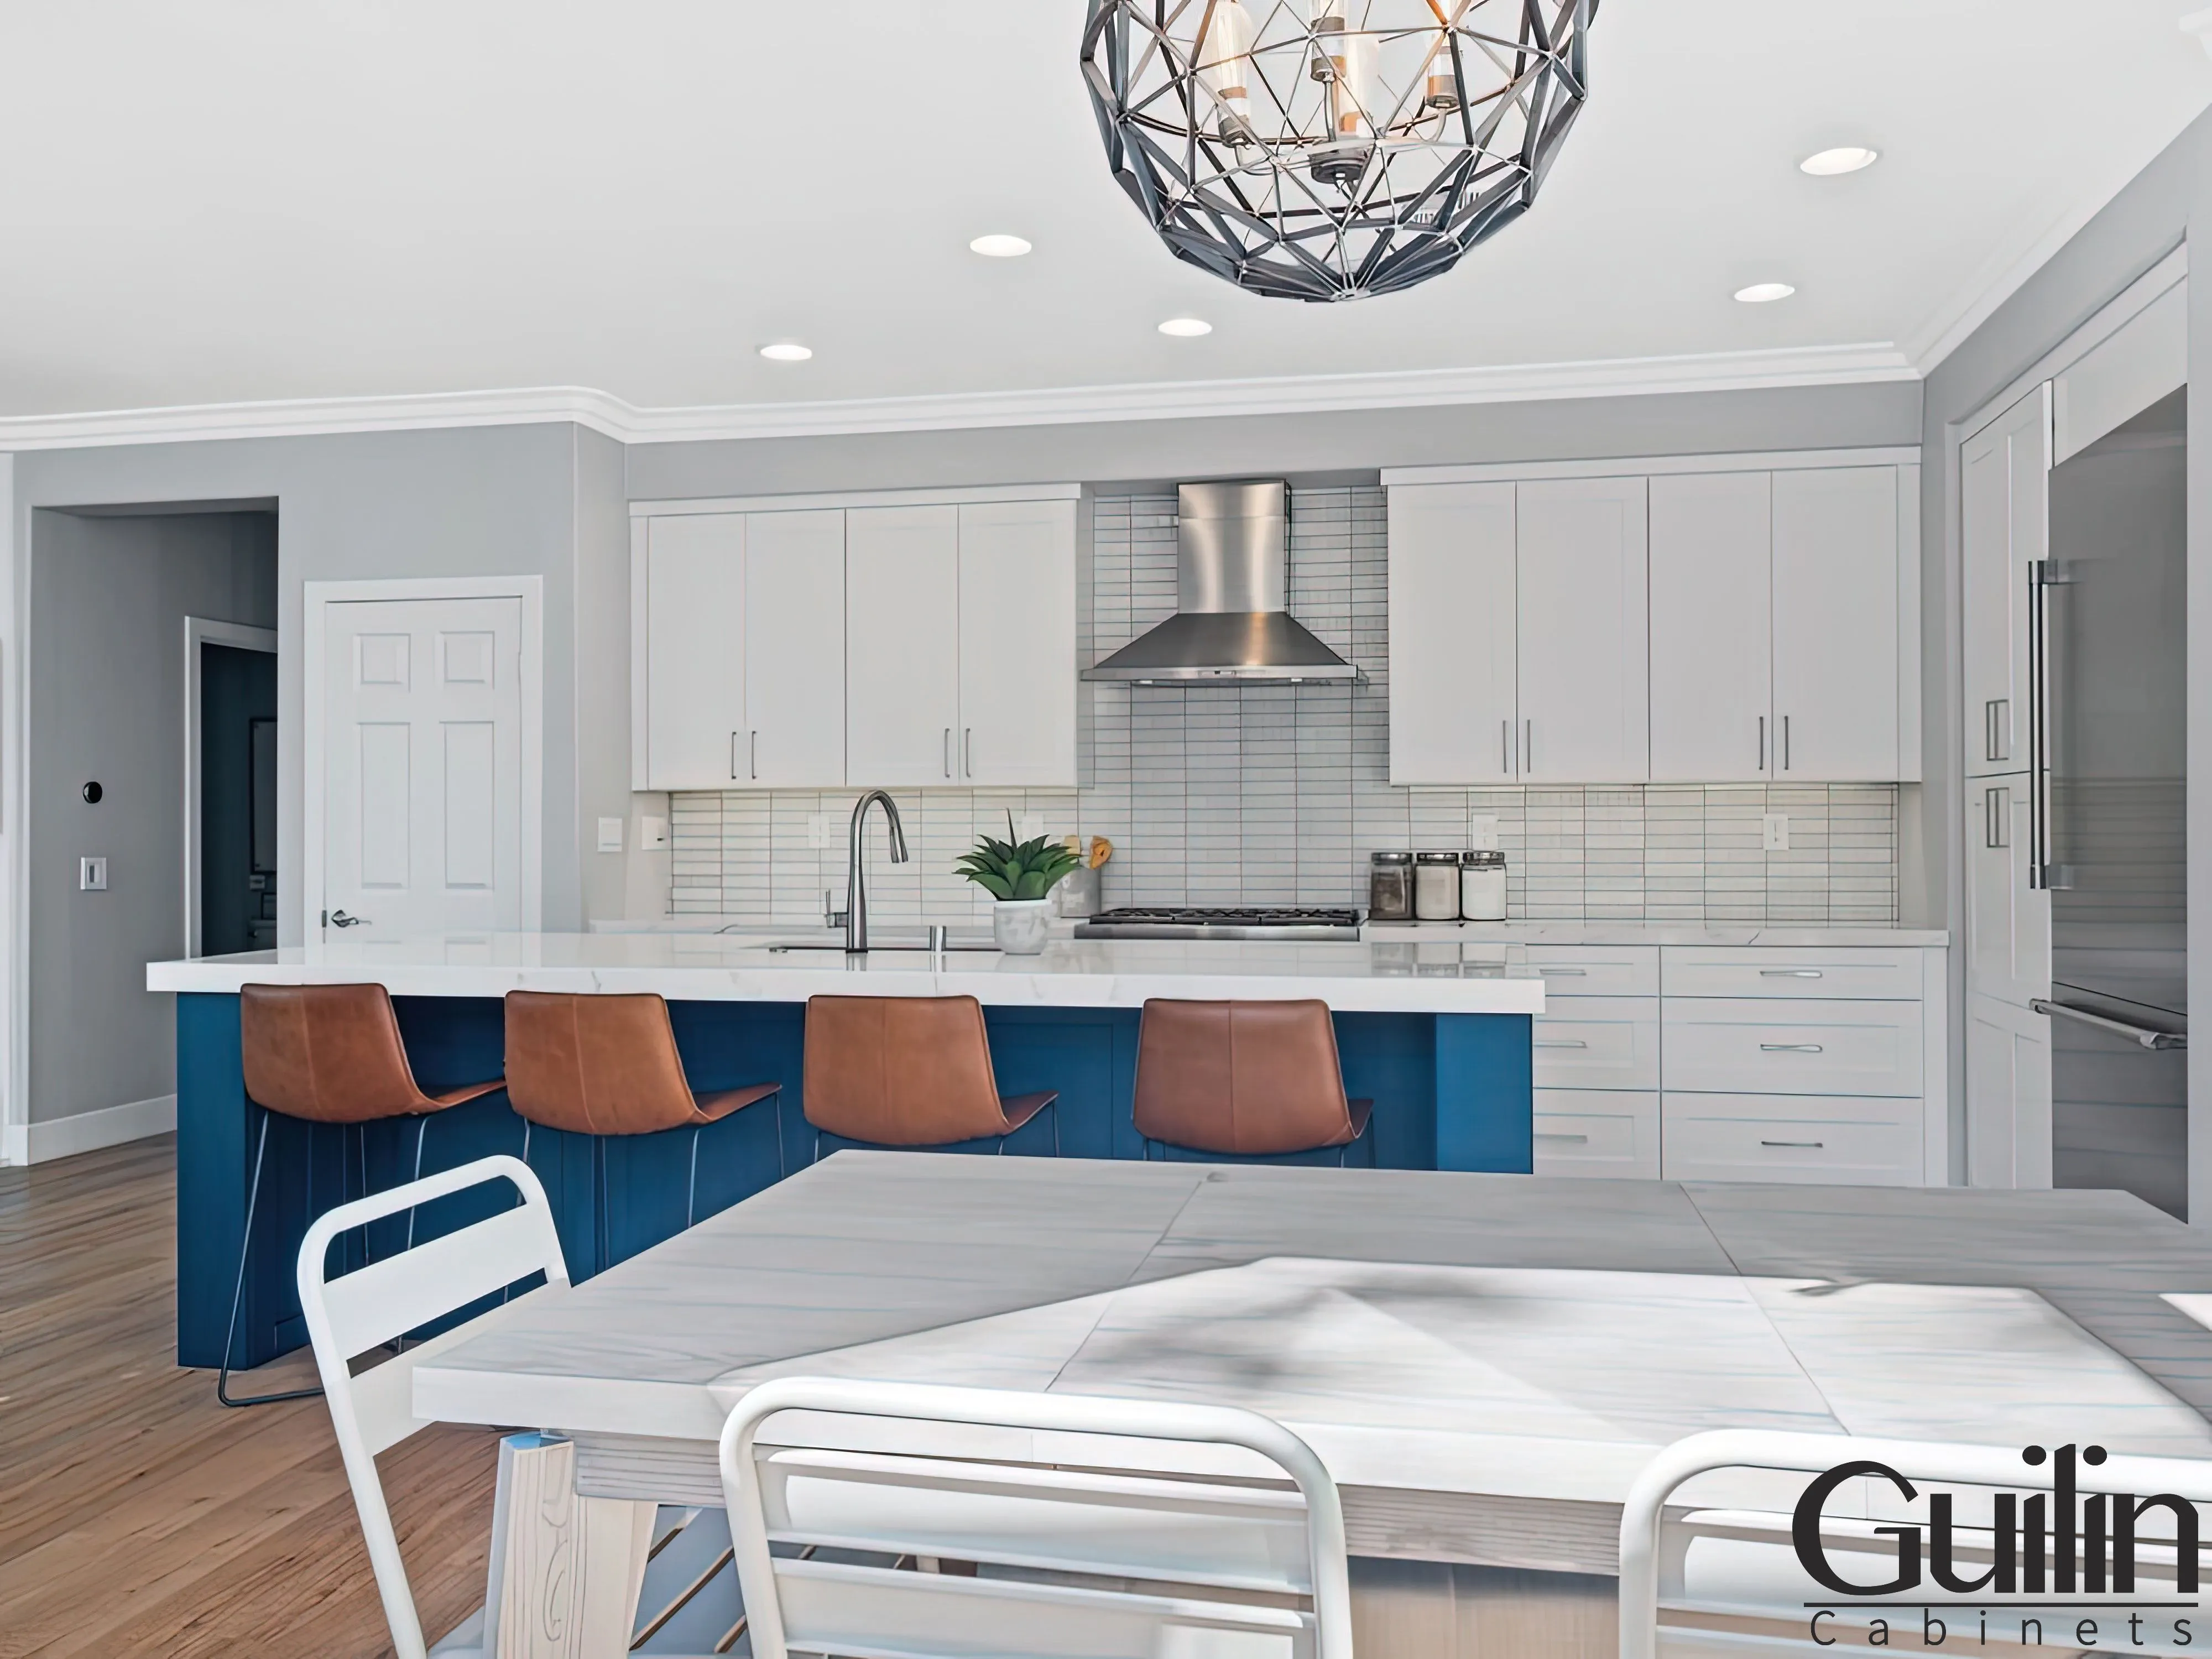 A kitchen with navy blue cabinets needs to be designed with color in mind since the proper color scheme can really make the room pop.